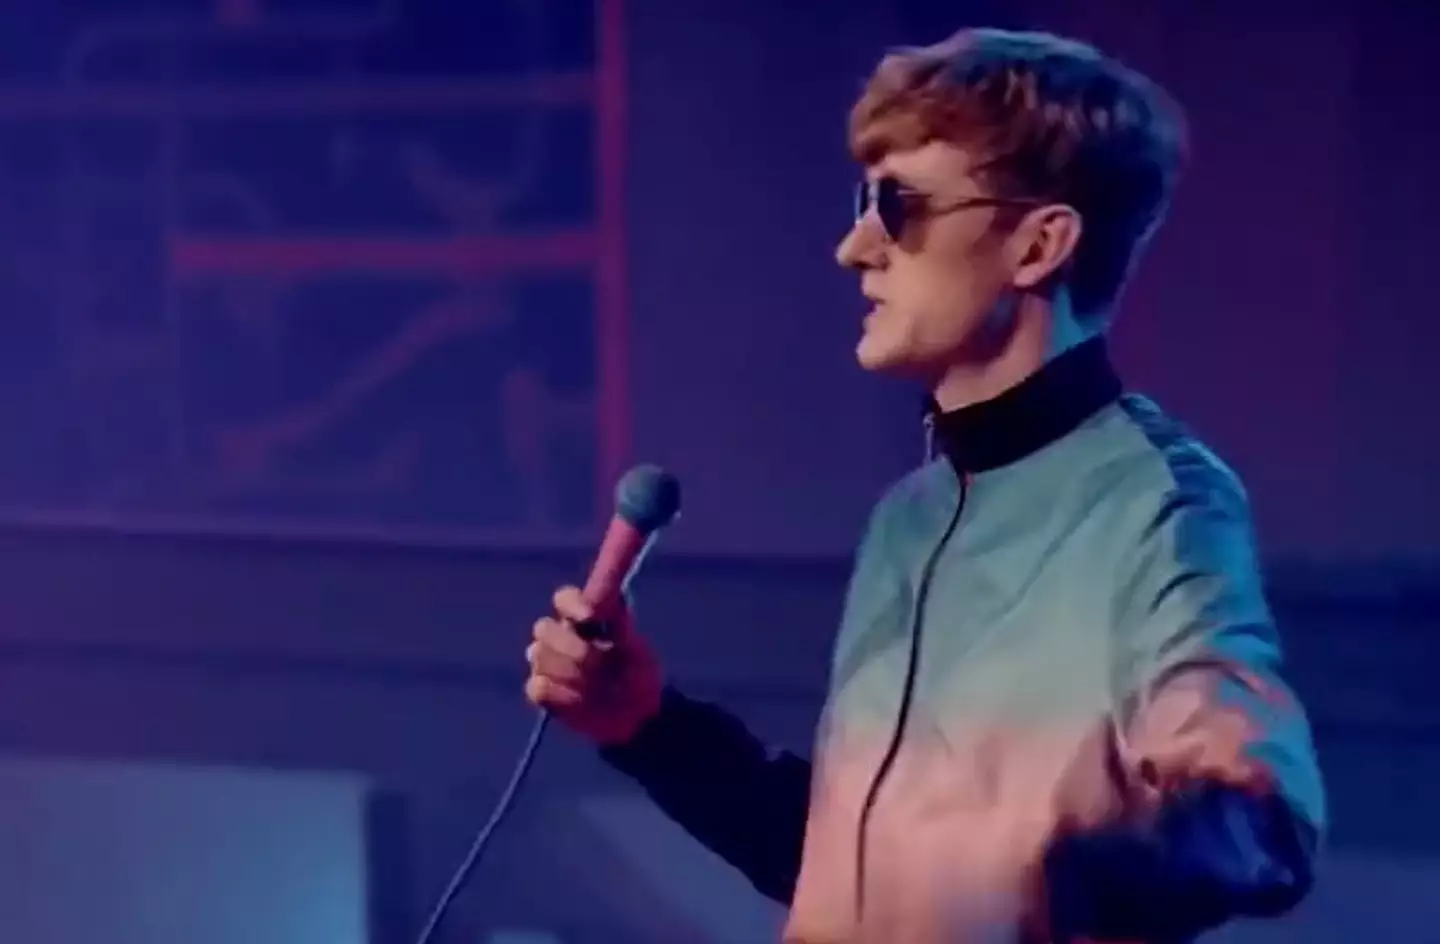 That James Acaster clip is going round again, you know the one.